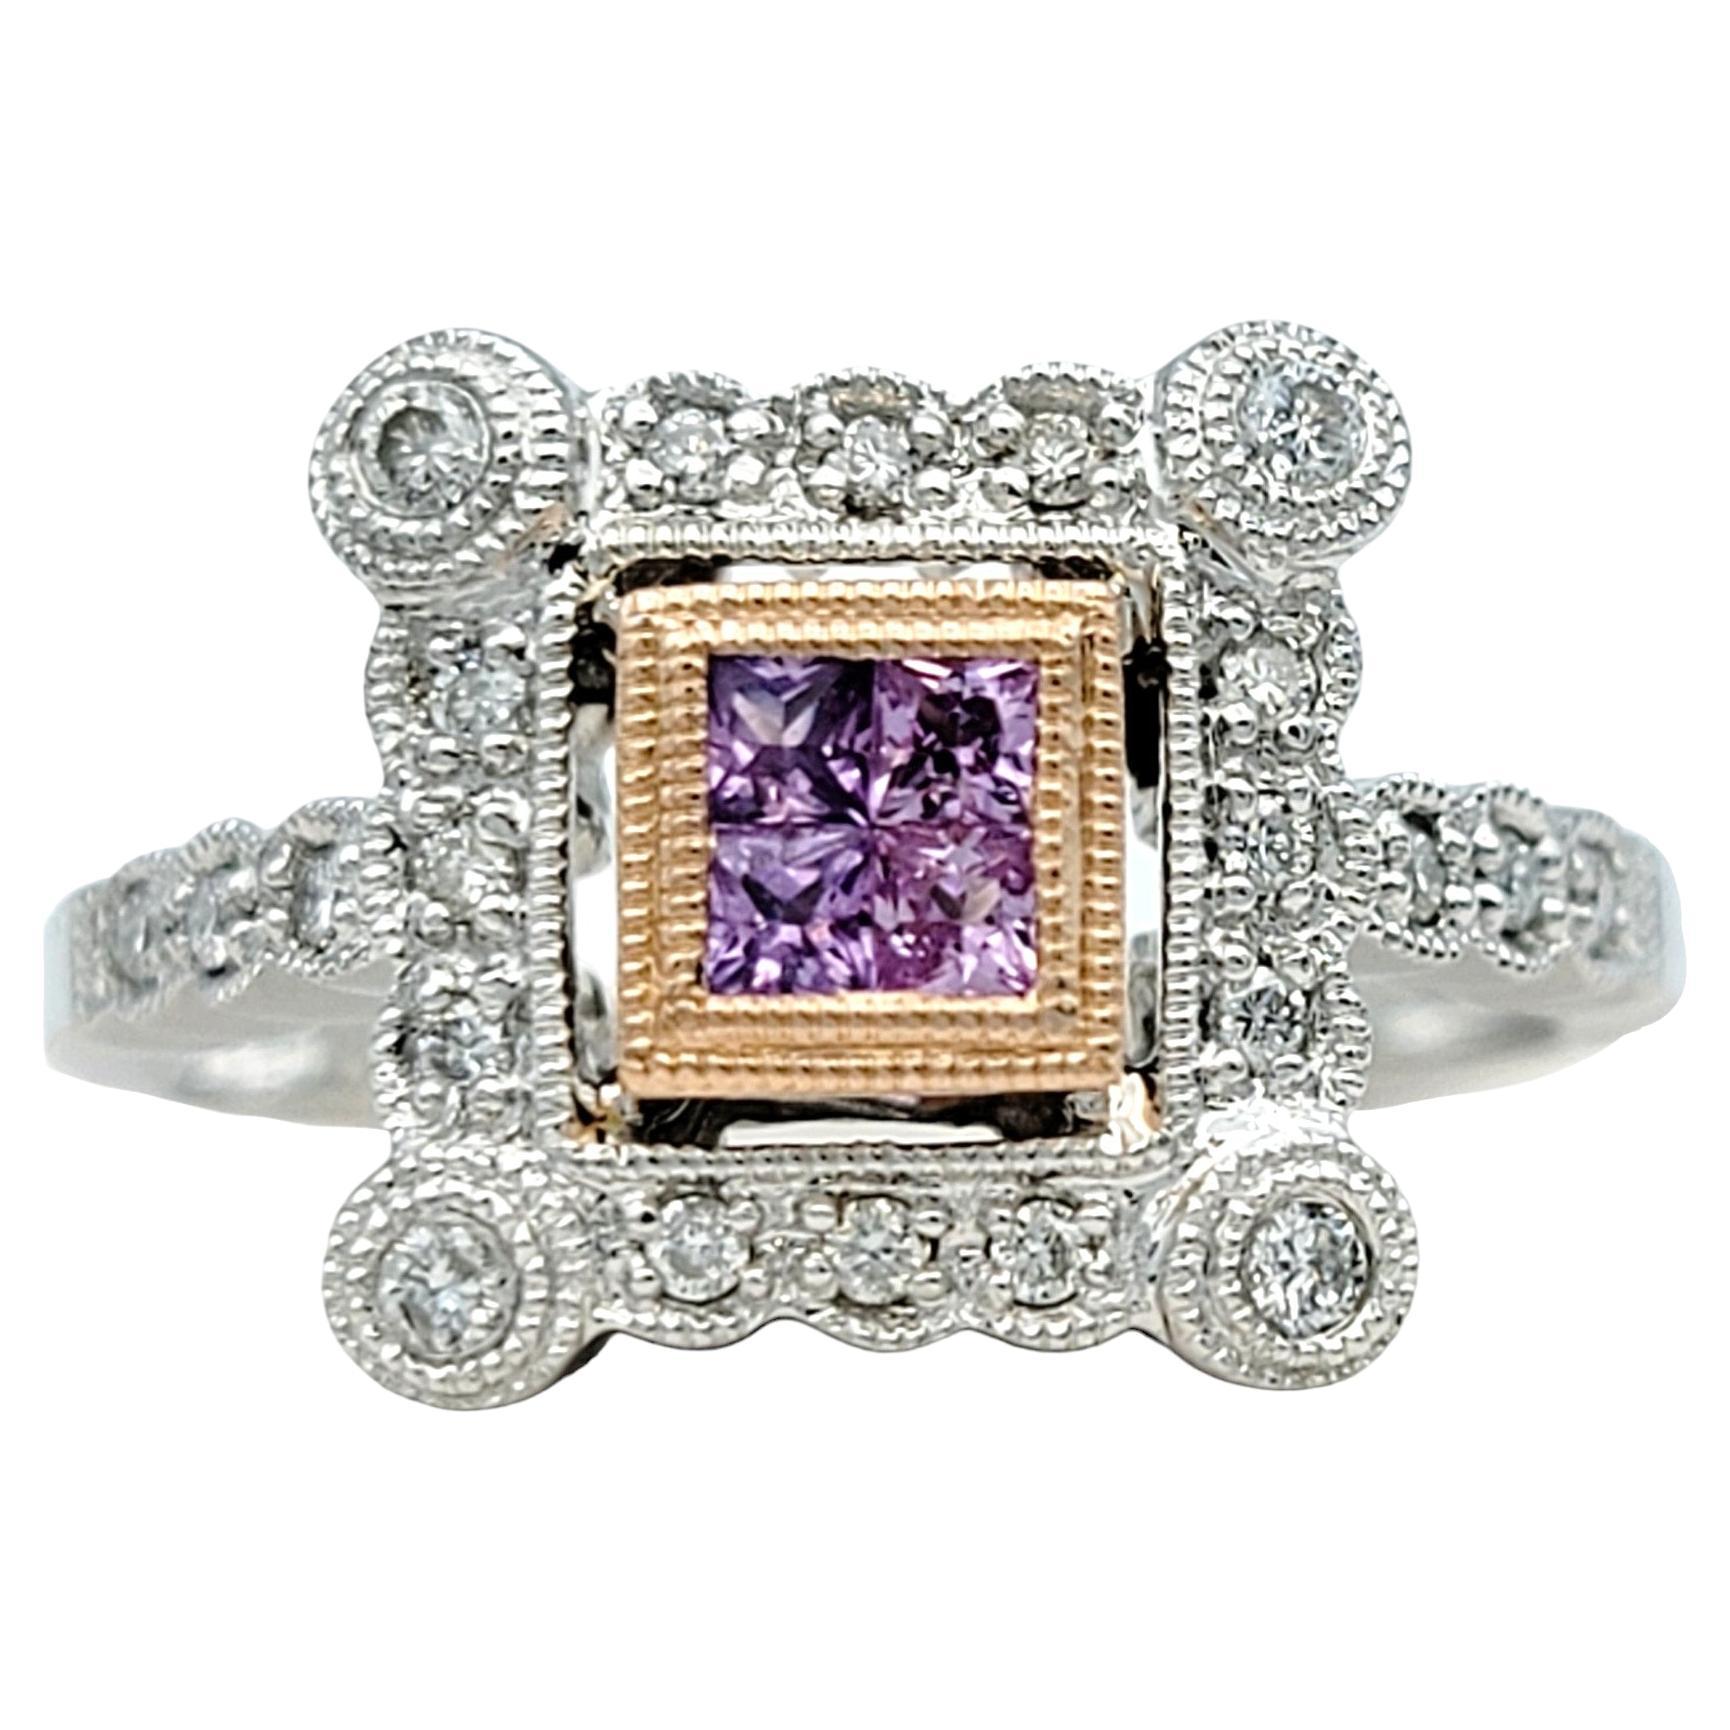 Pink Sapphire and Diamond Squared Halo Ring Set in 14 Karat White and Rose Gold